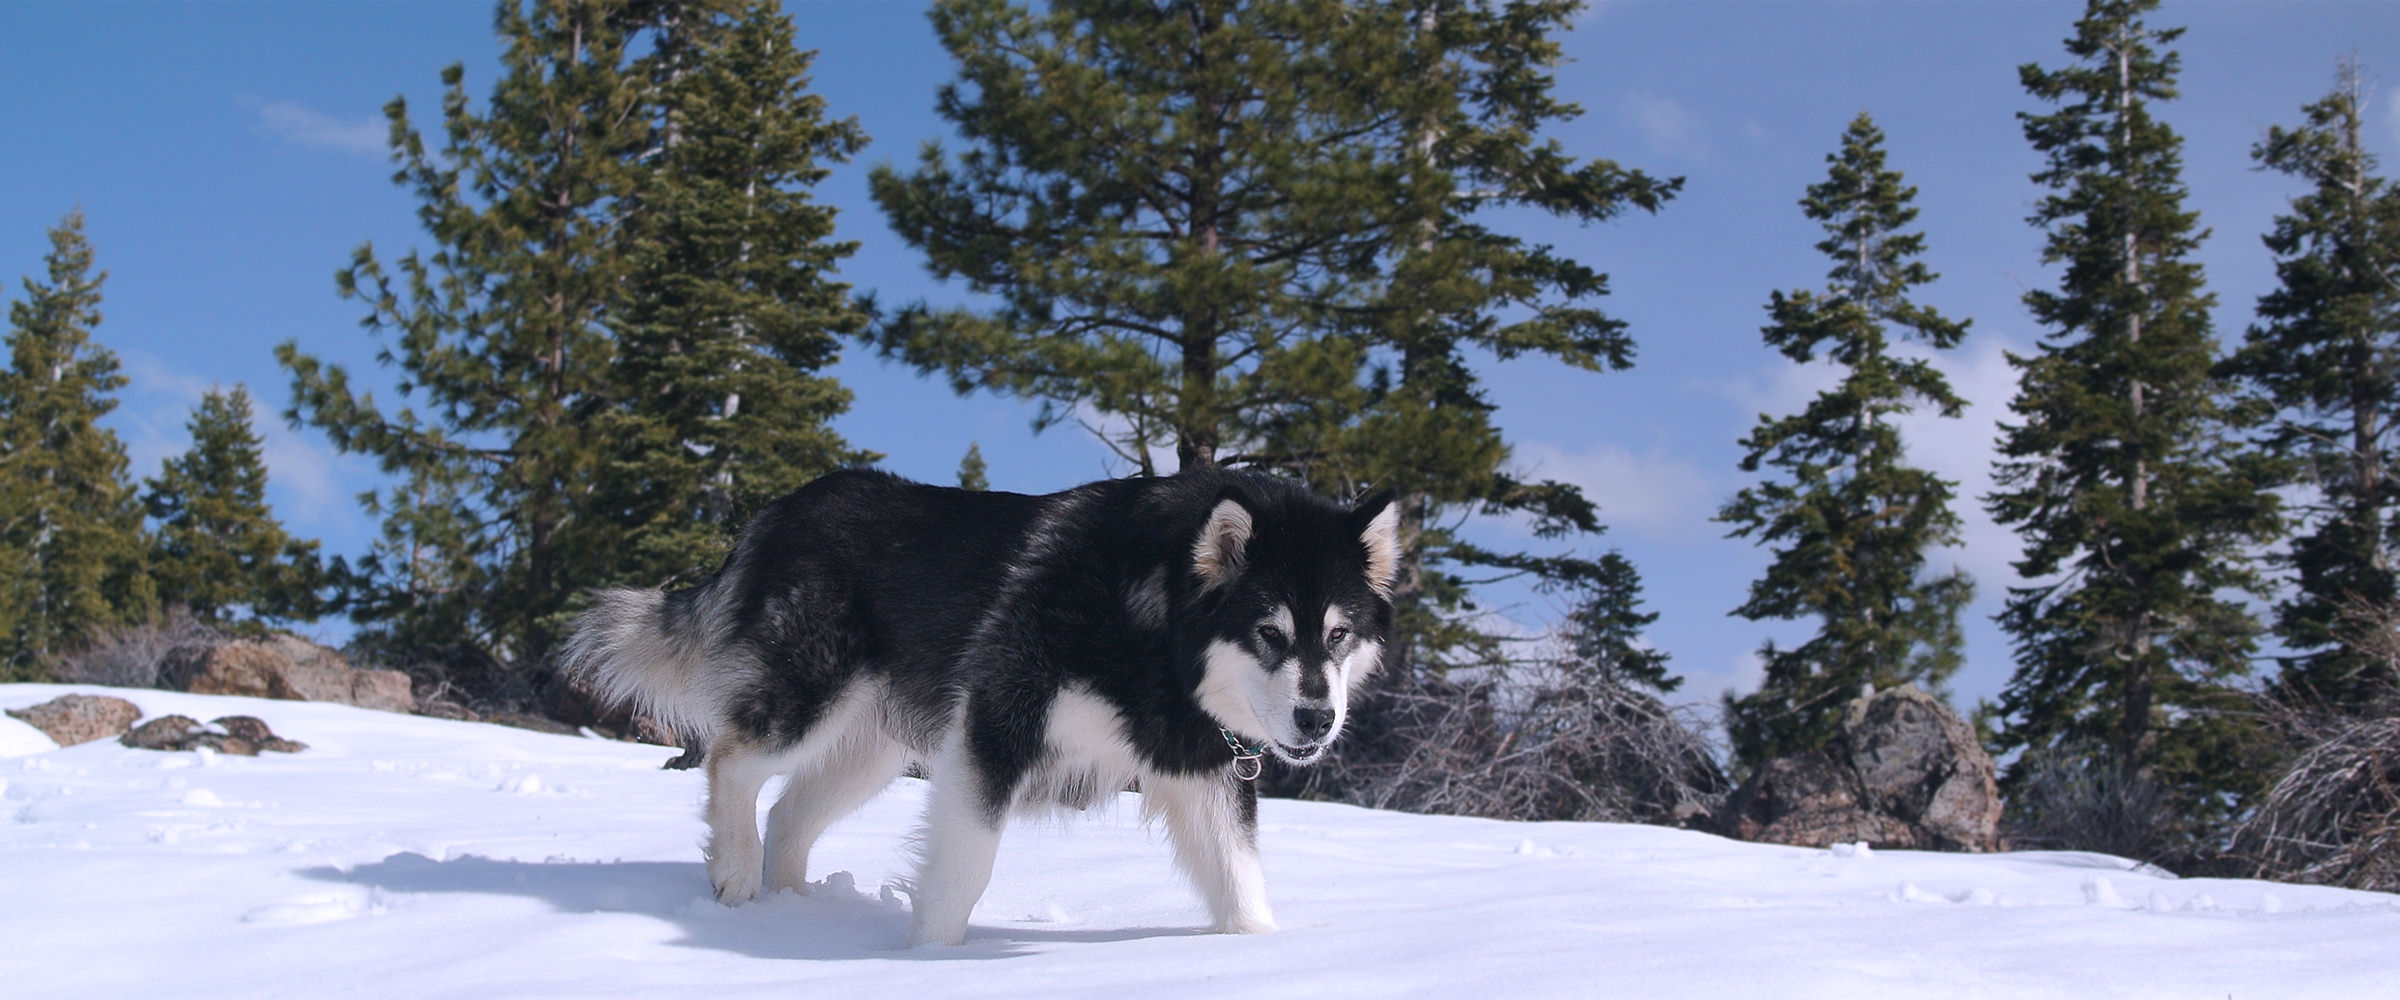 Caring breeder of purebred Alaskan Malamutes from Champion & working-titled sled dogs